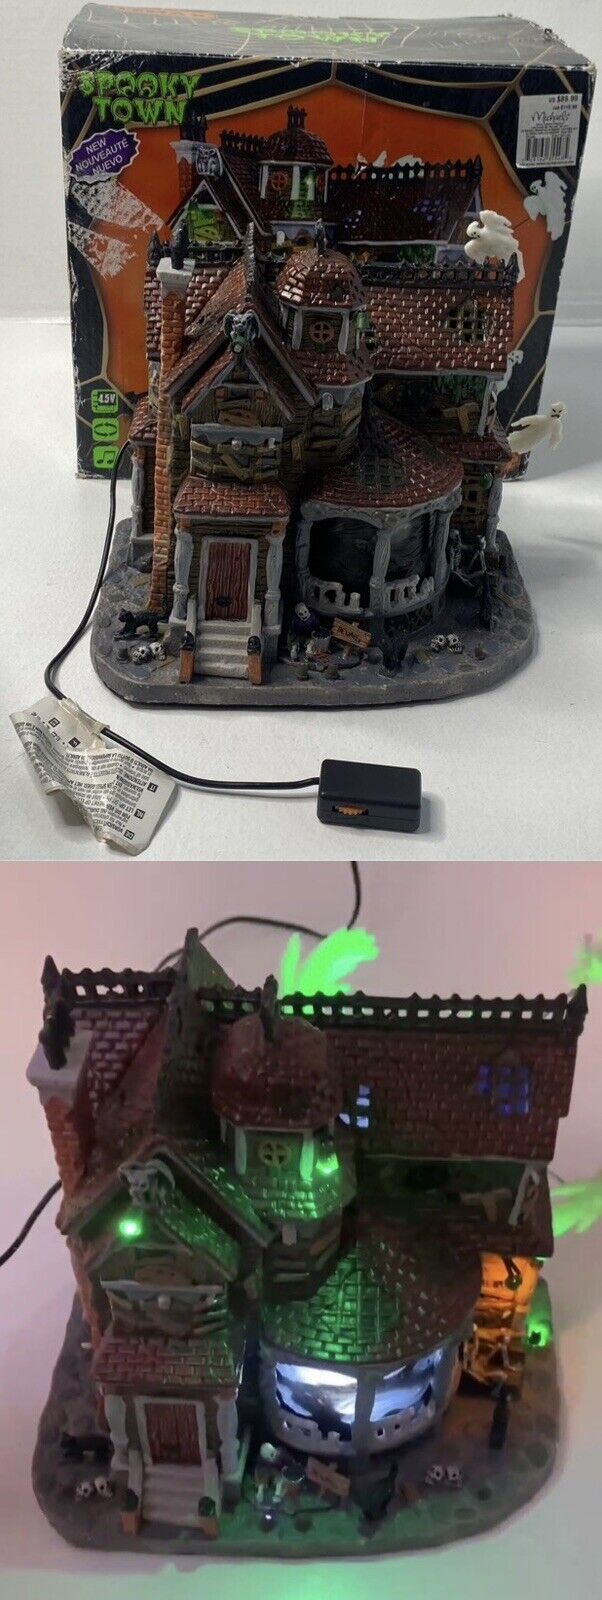 Lemax Spooky Town Halloween Last House On The Left 35548 Animated Sounds Lights